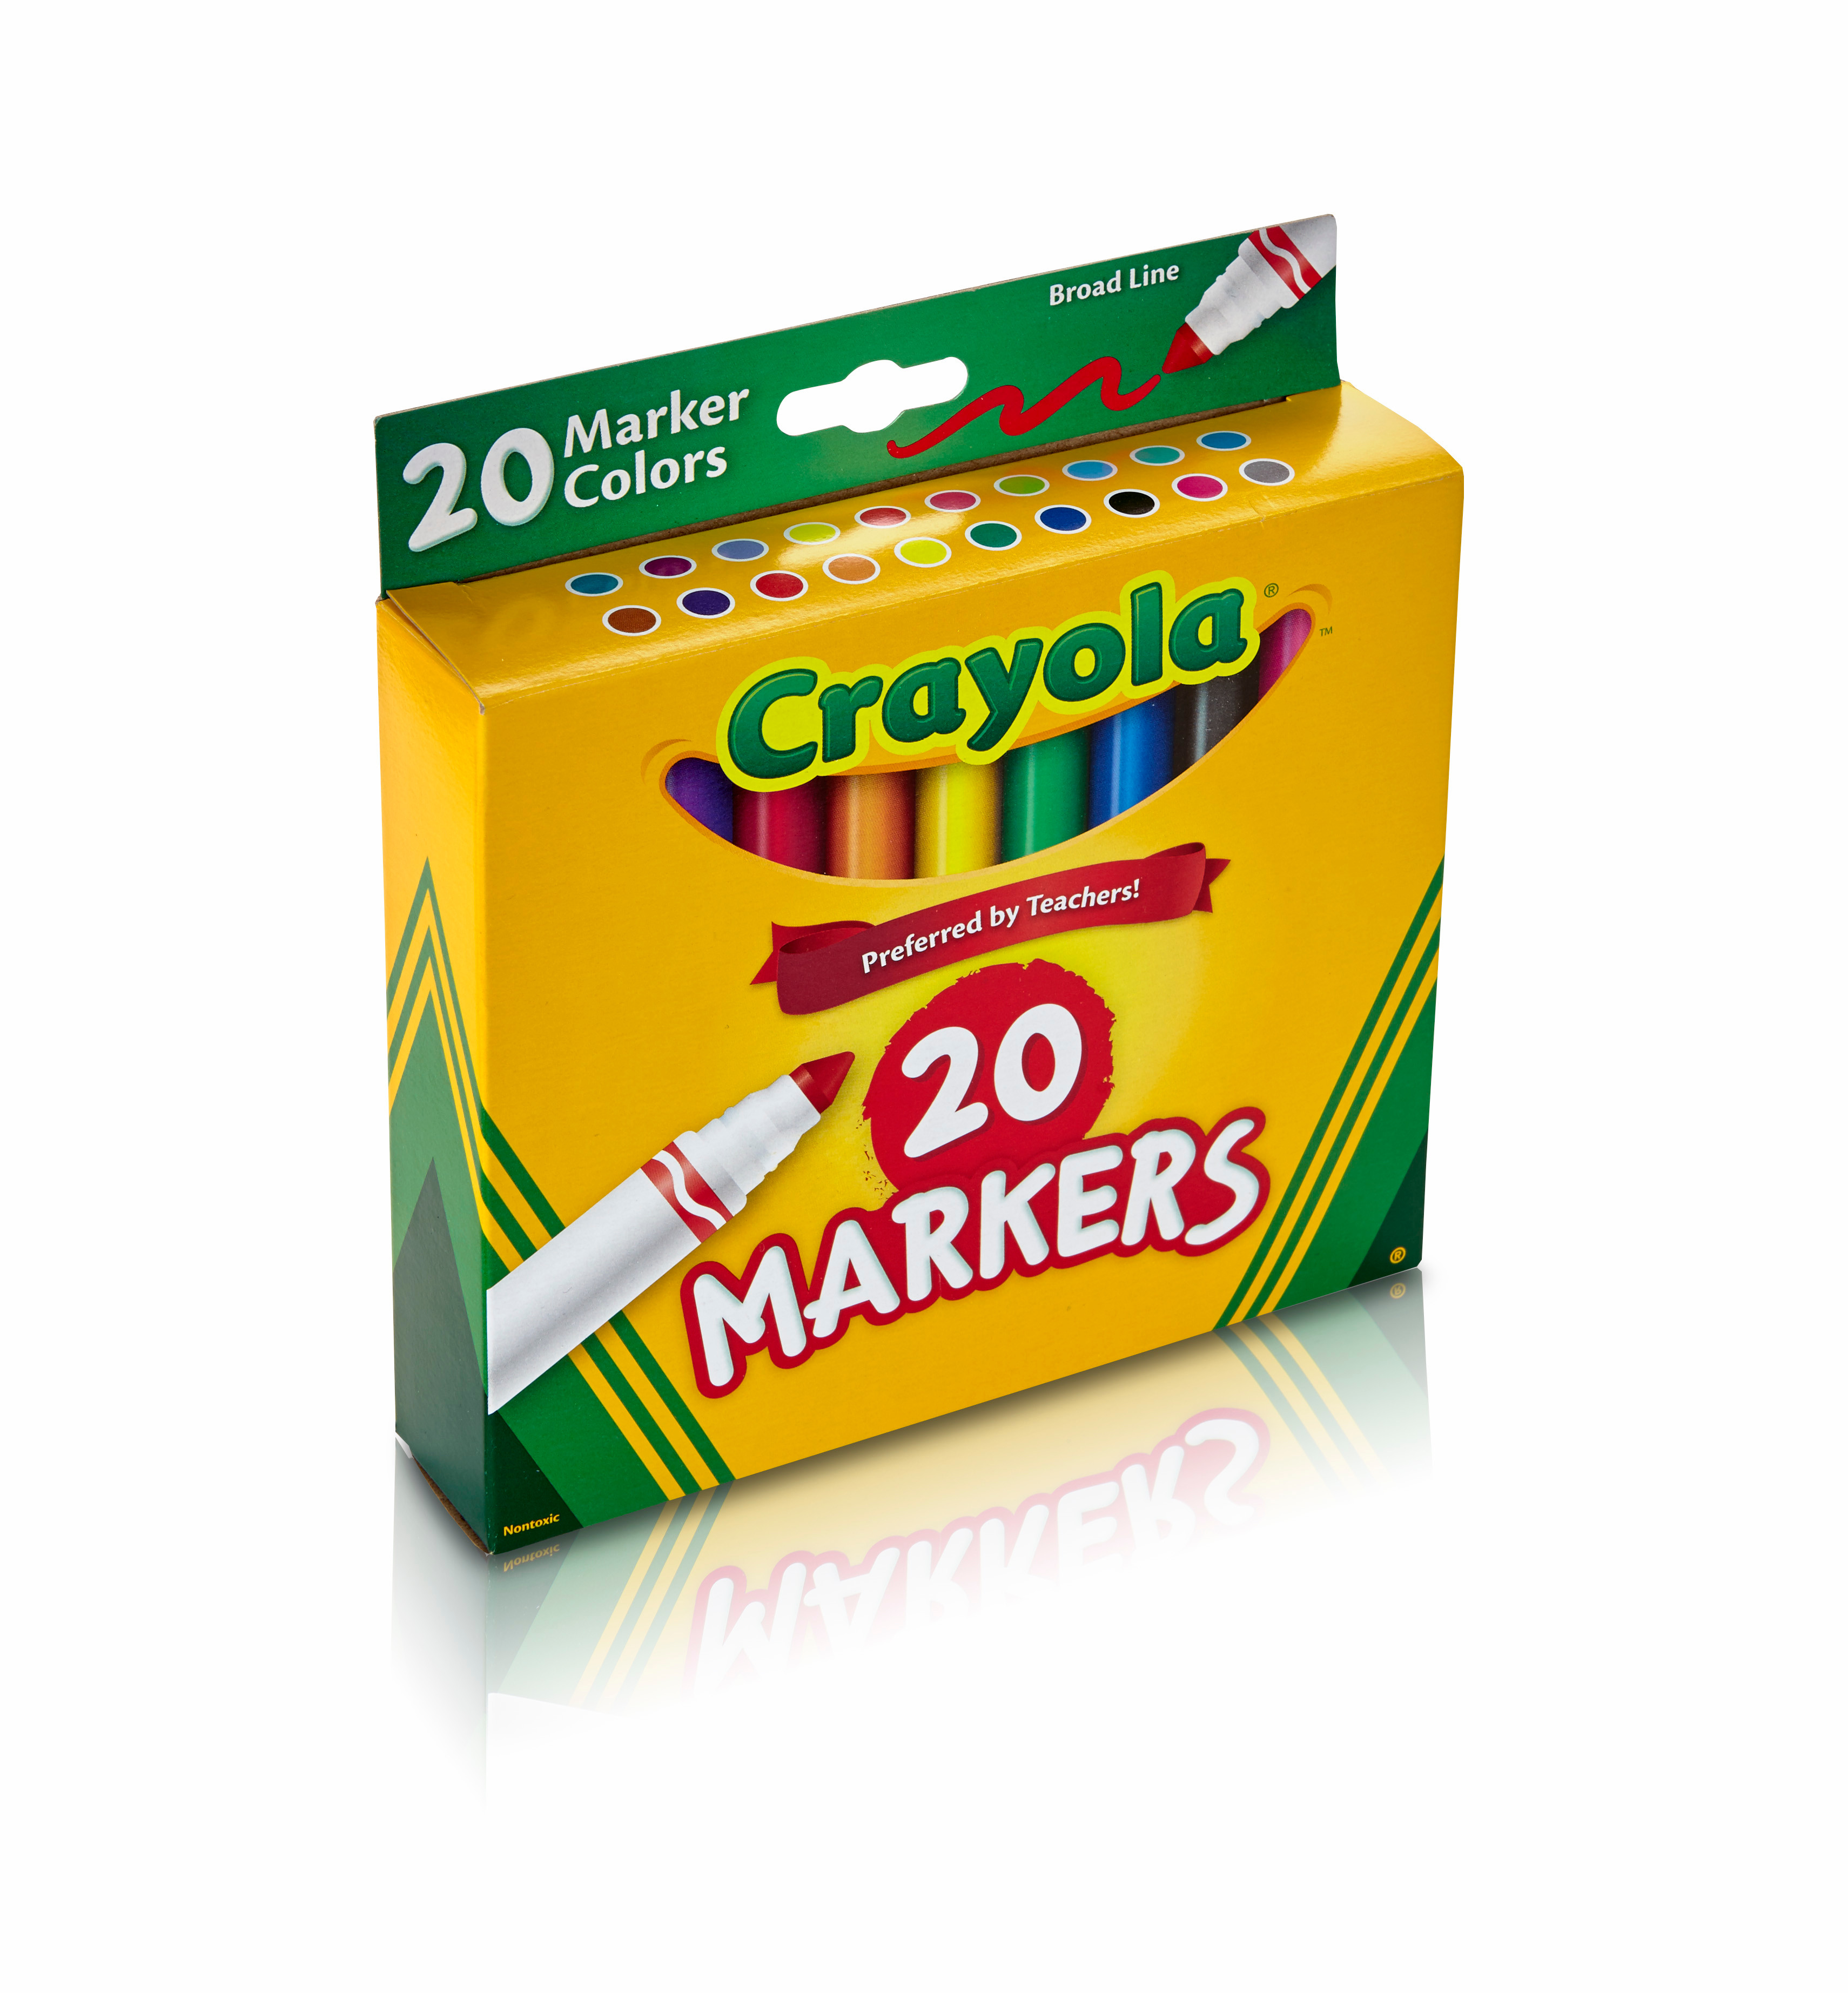 Crayola Broad Line Markers, 20 Ct, School Supplies, Easter Basket Stuffers, Classic Colors, Child - image 4 of 8